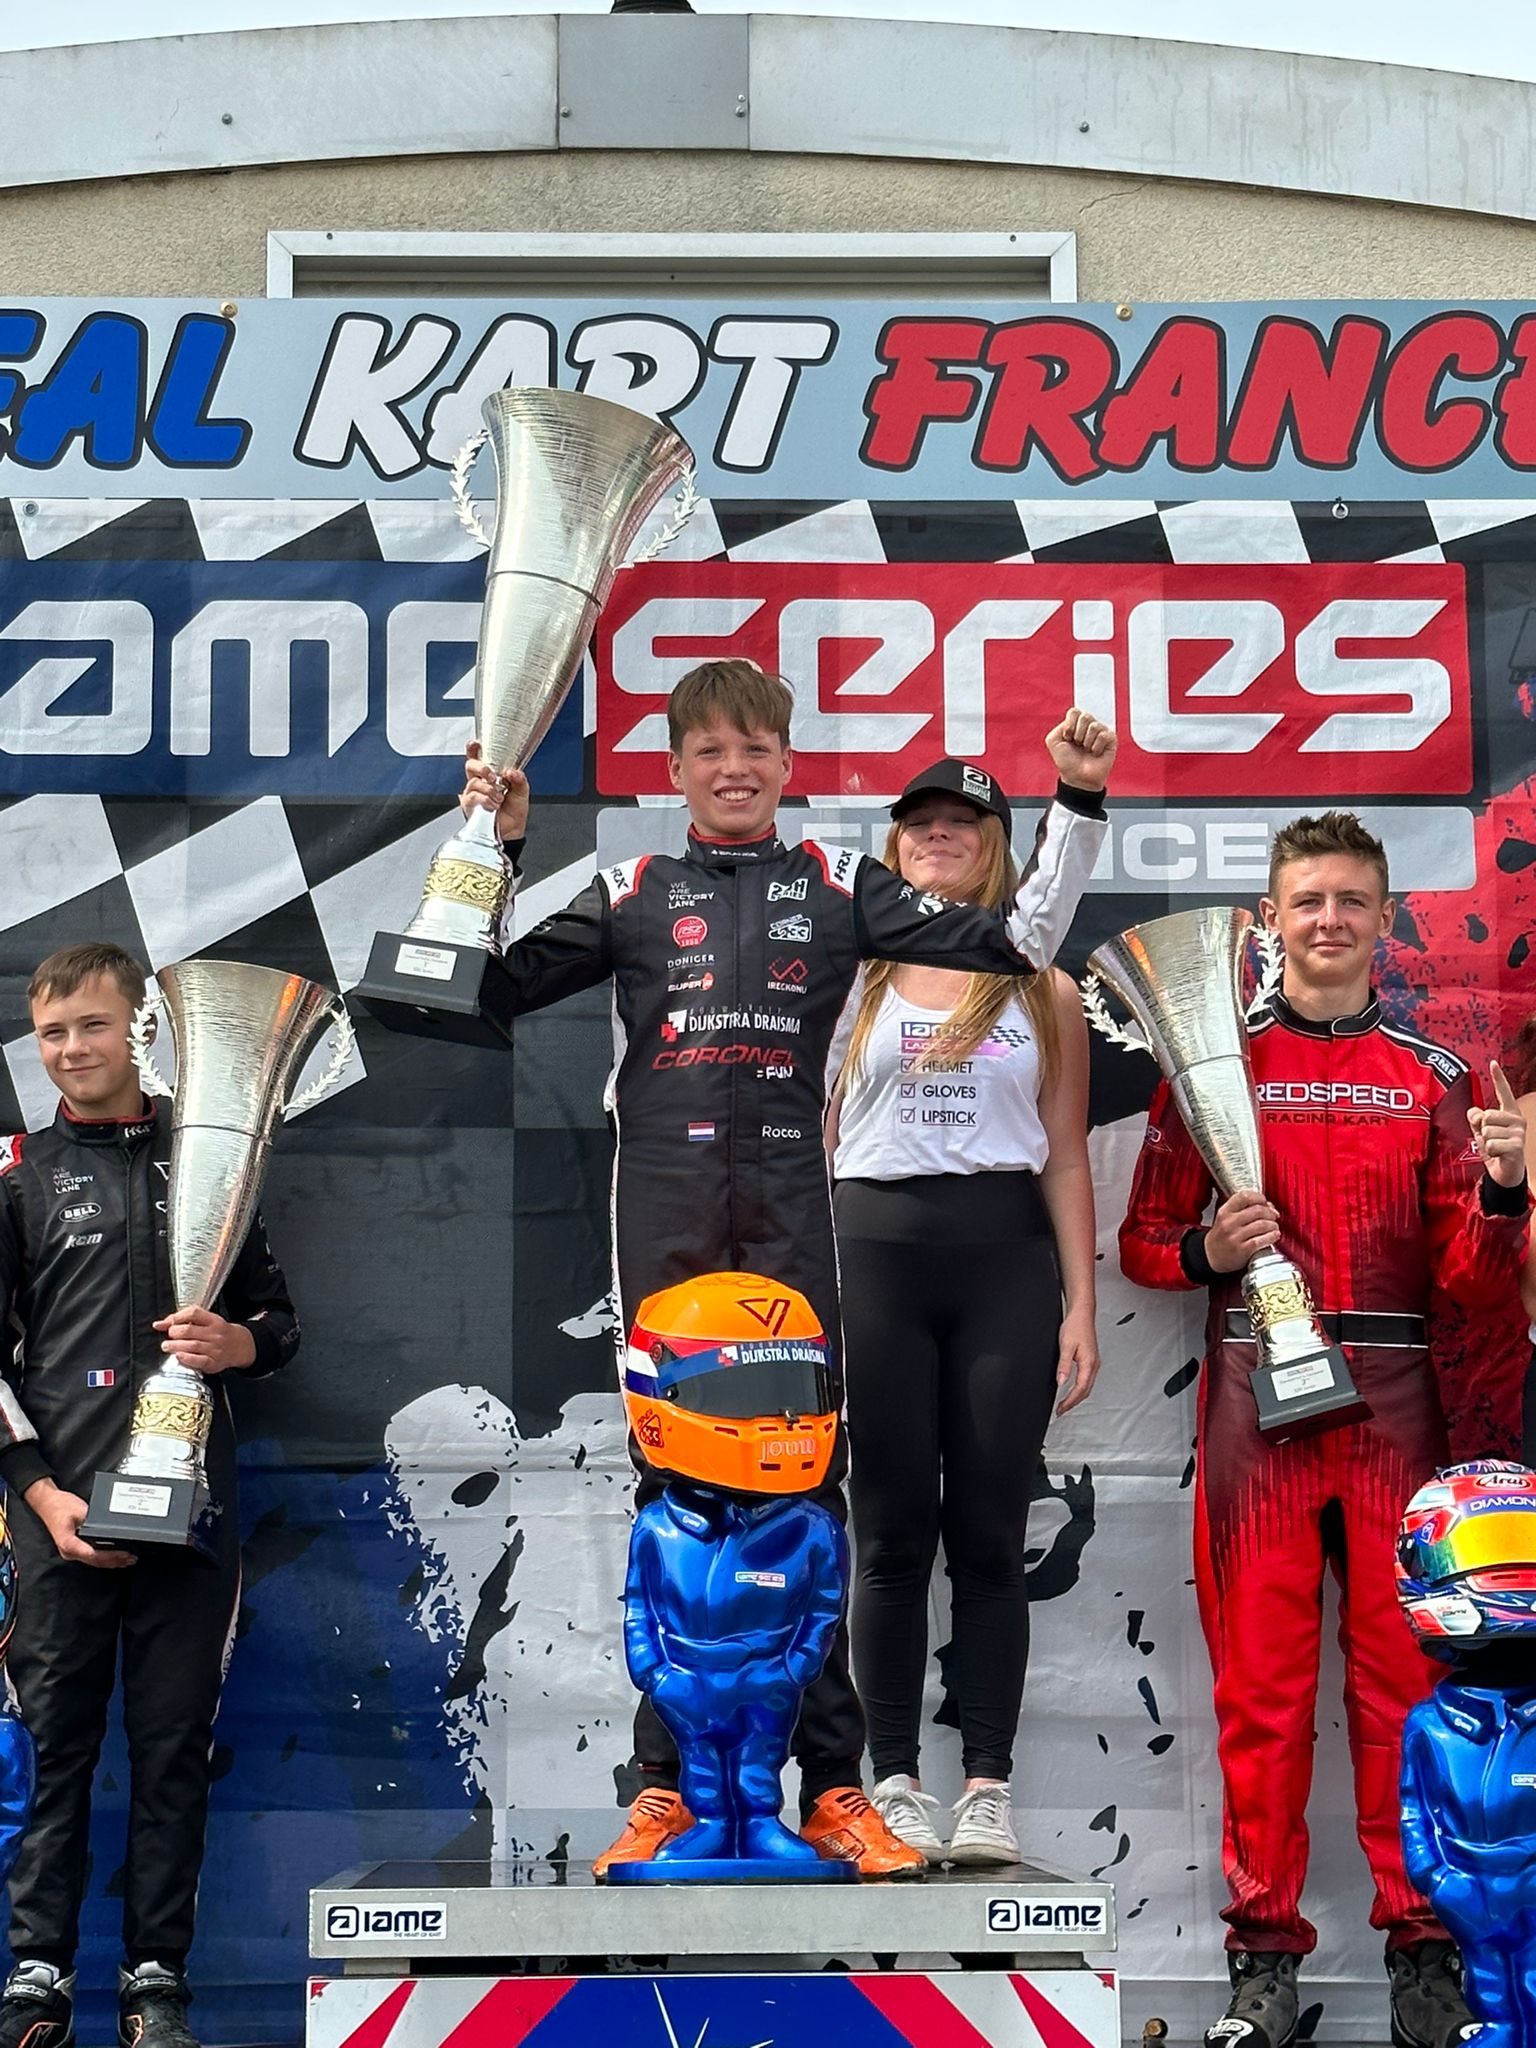 Featured image for “Rocco Frans kampioen IAME Junior”